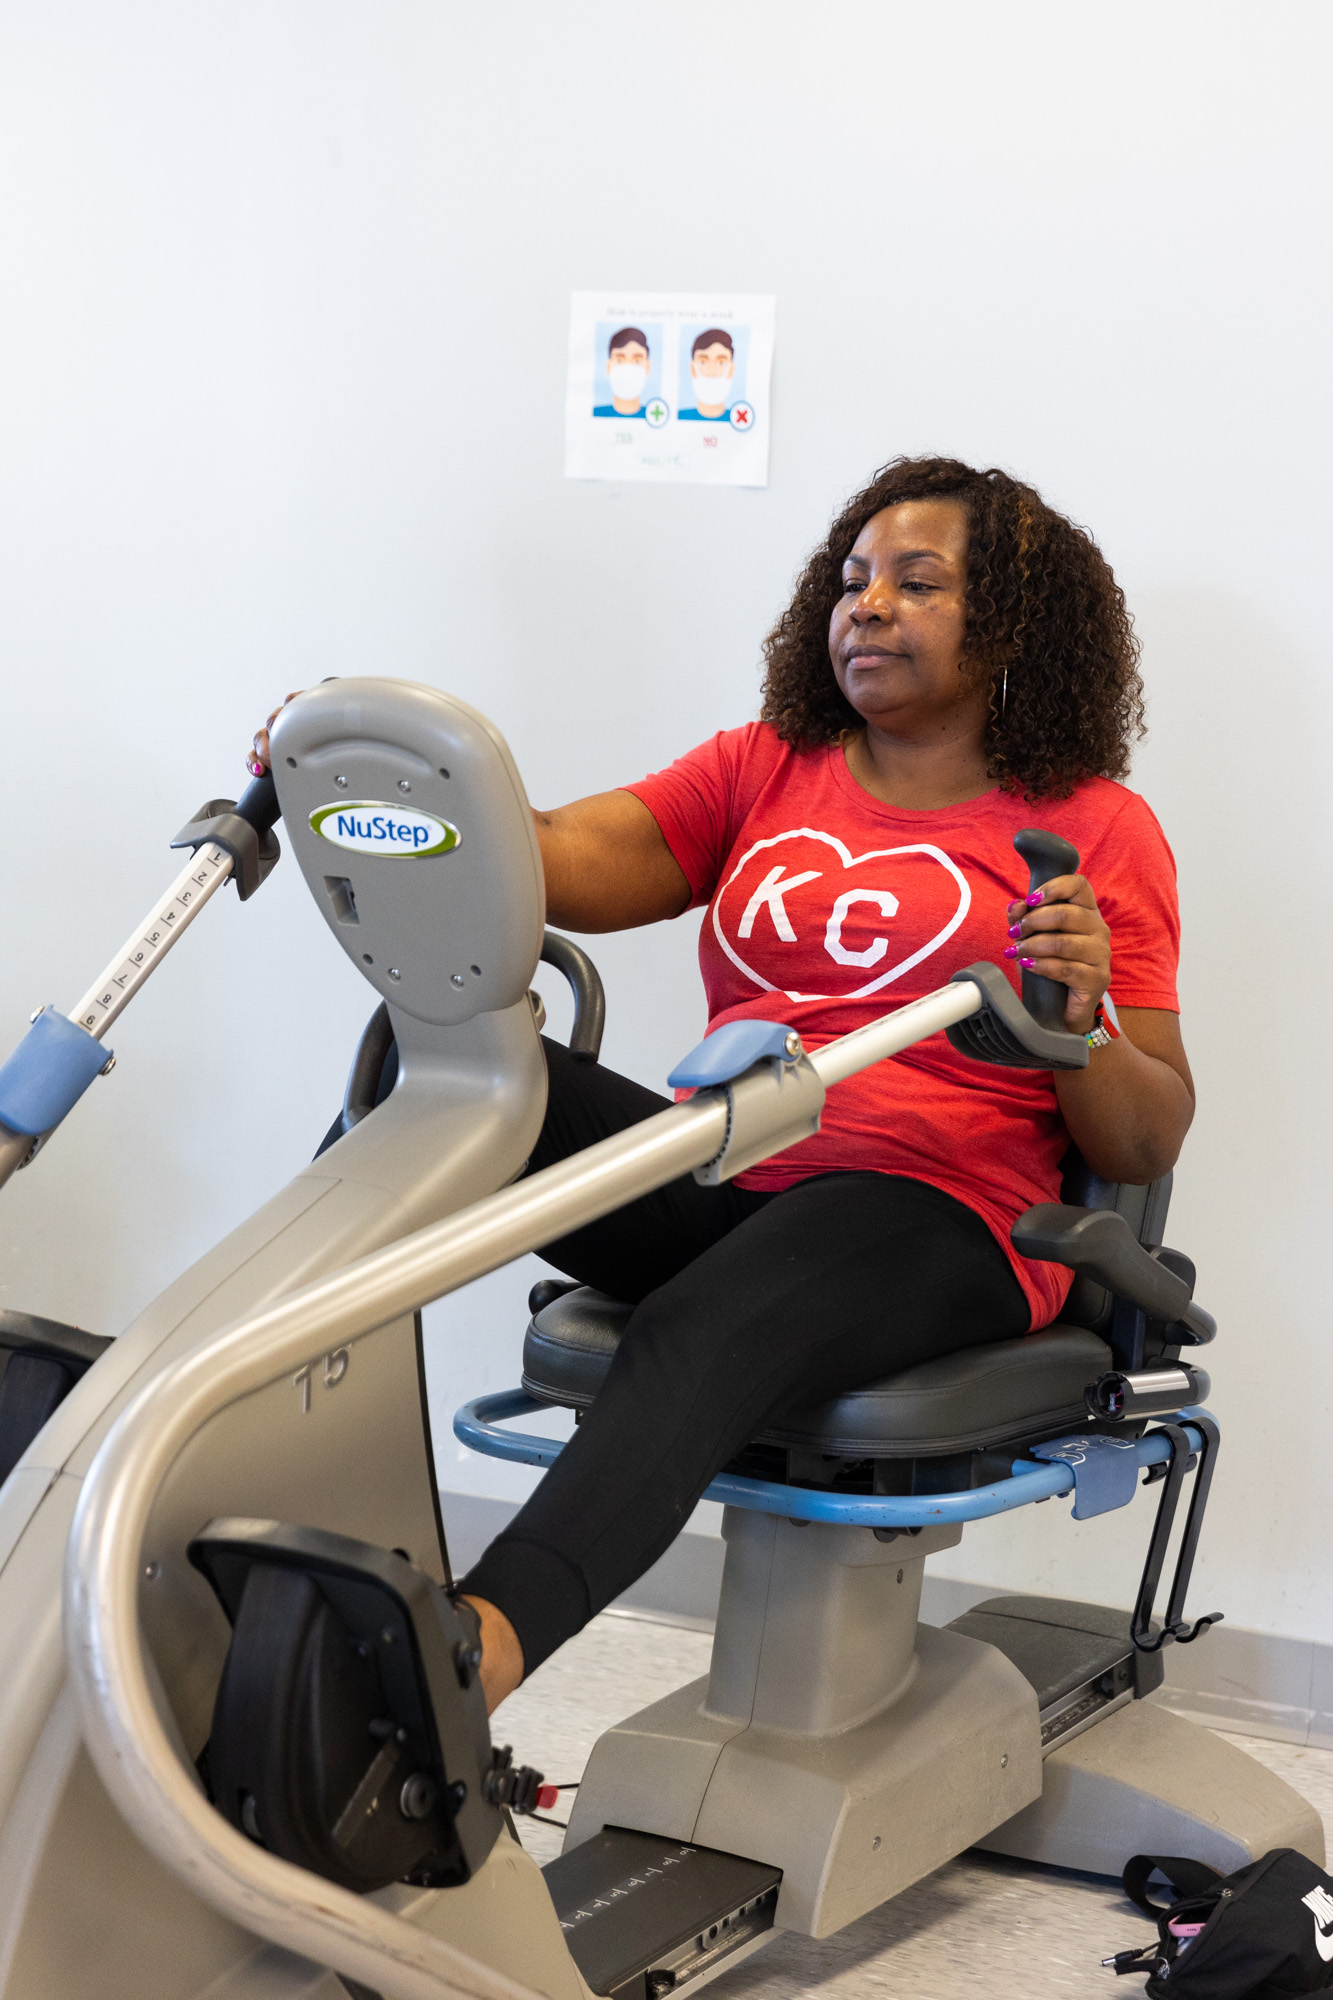 Patient in red KC shirt using gym equipment